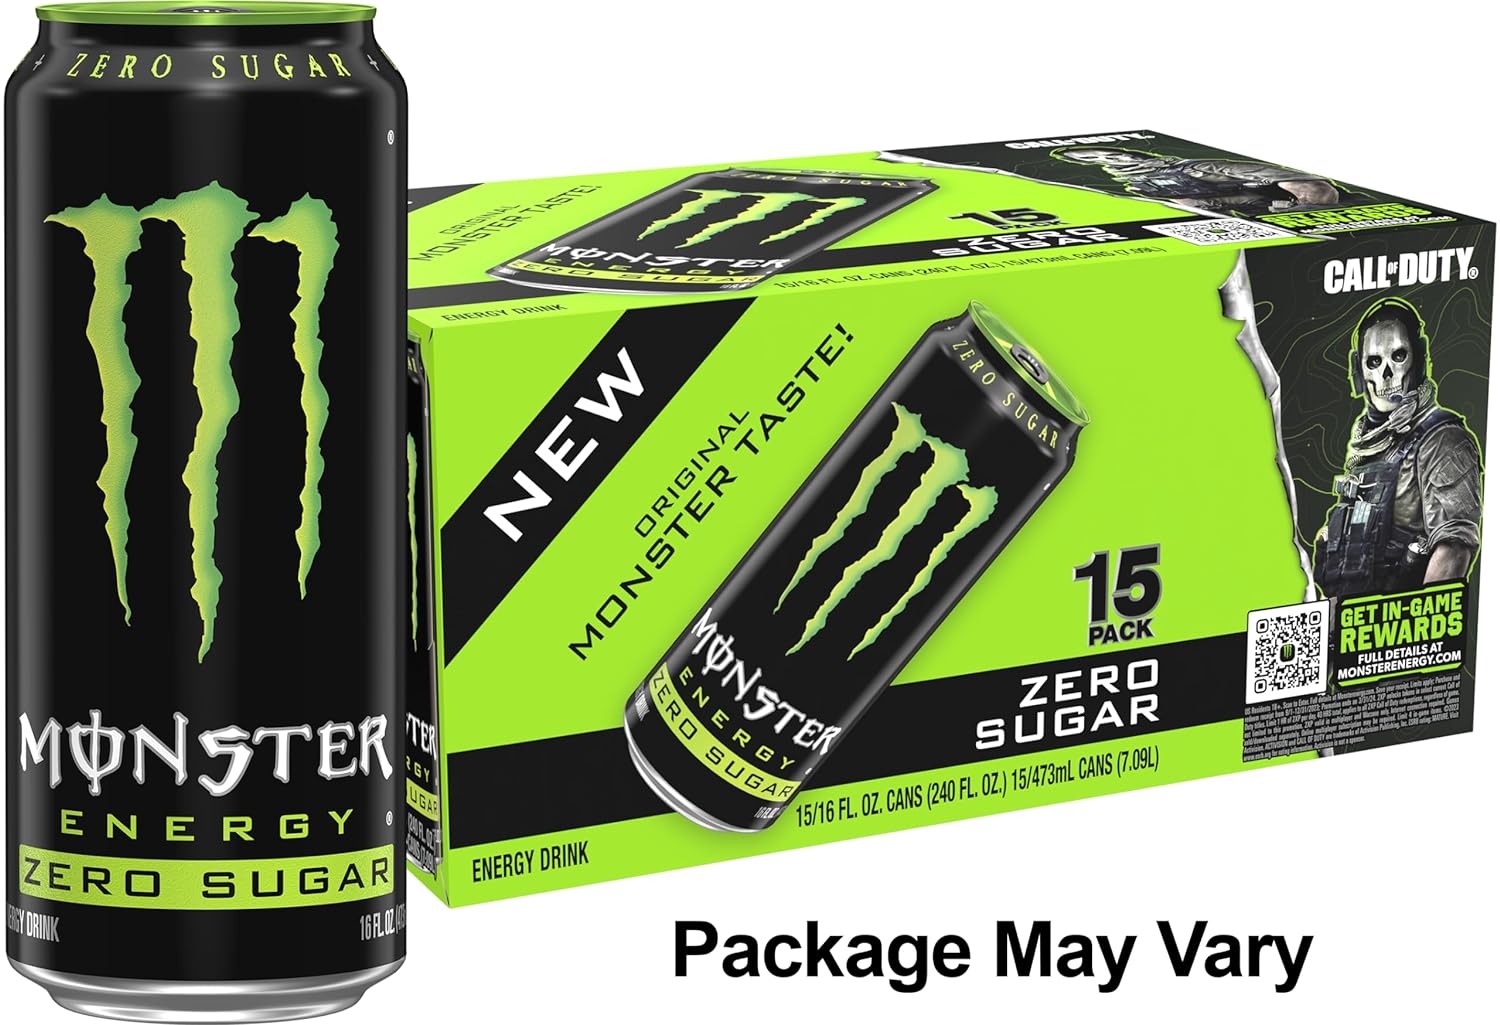 Original Monster Sugar Free 15 Pack 21.29 with subscribe and save plus 20% coupon! = $18.33 at Amazon